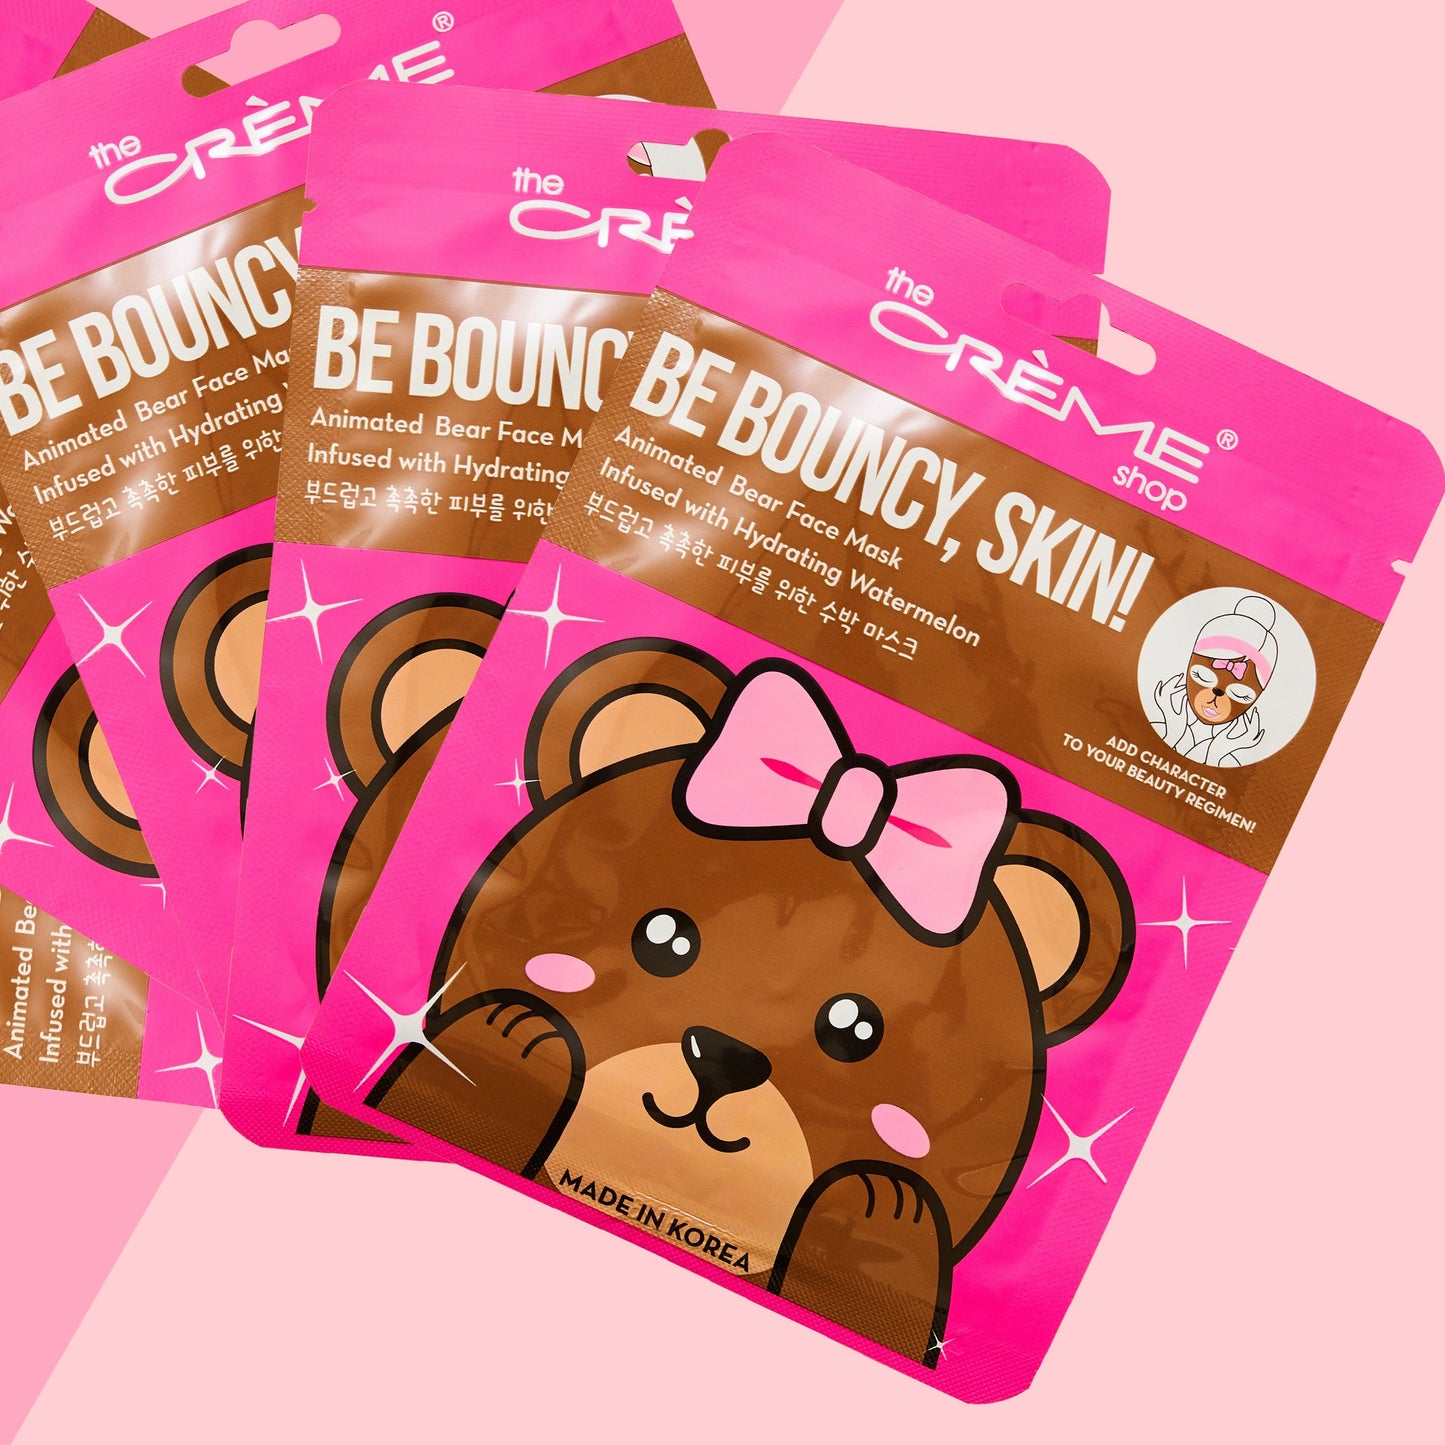 Be Bouncy, Skin! Animated Bear Face Mask - Hydrating Watermelon Animated Sheet Masks - The Crème Shop 